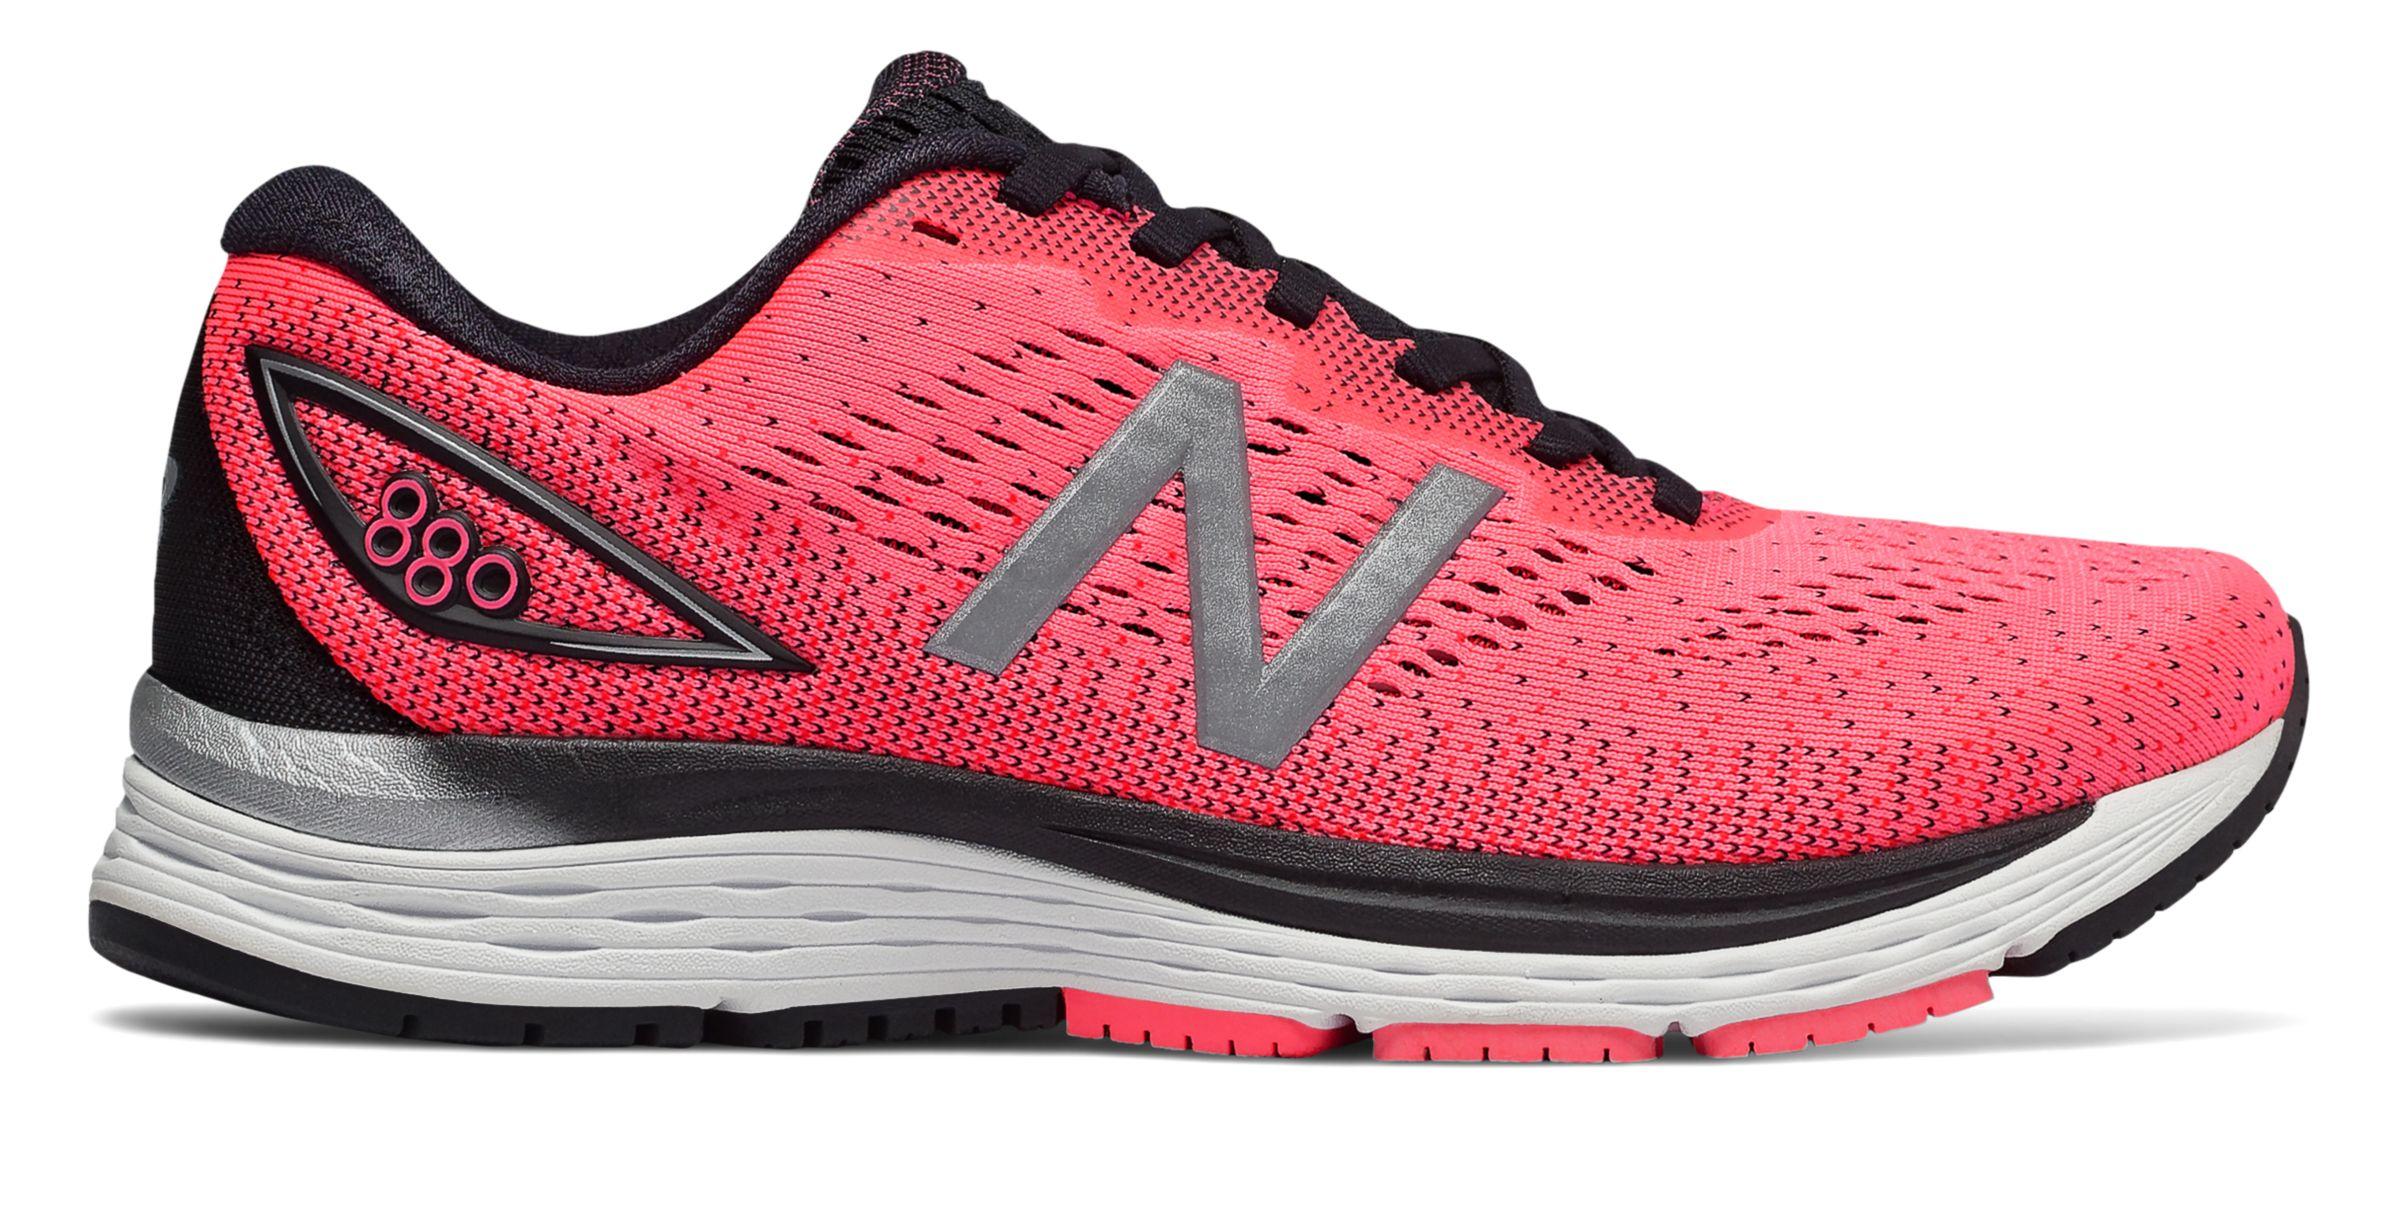 New Balance 880v9 Women's Outlet Shop, UP TO 67% OFF